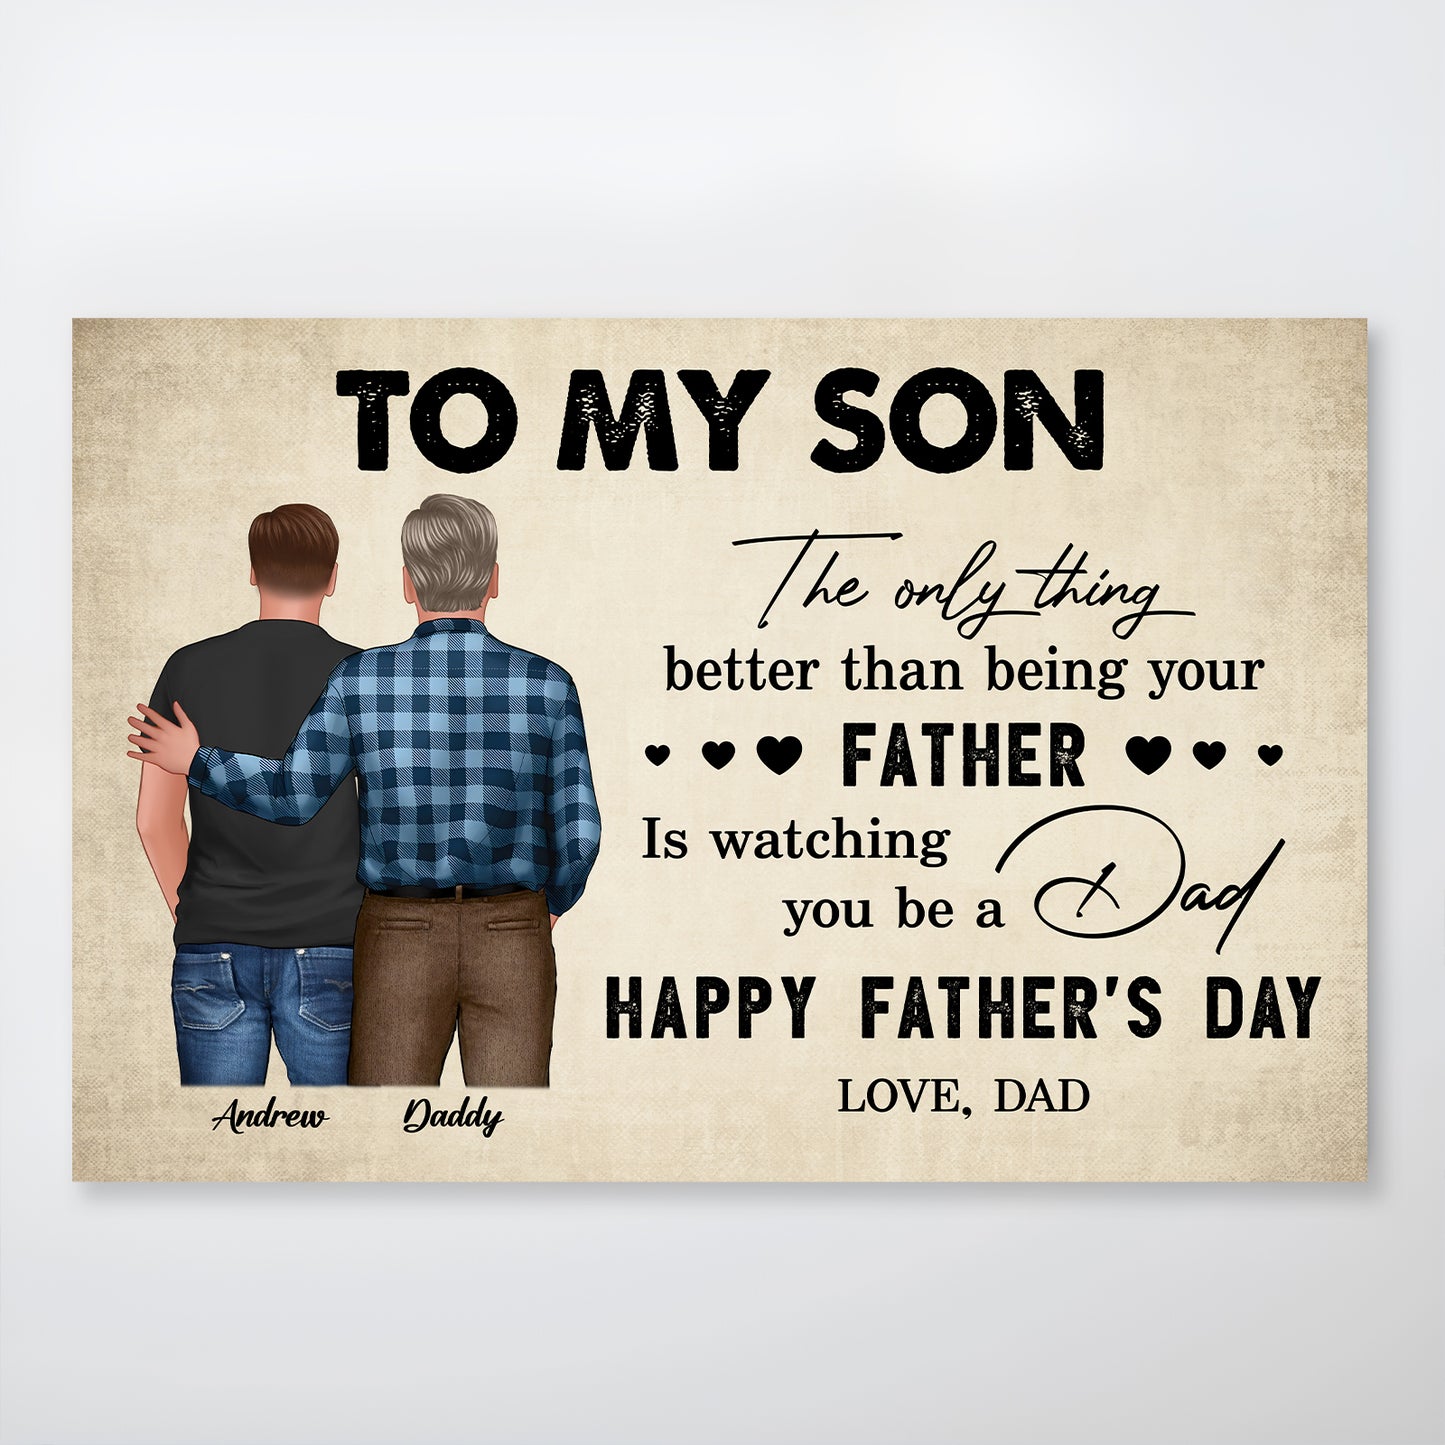 Family - From Mom To Son - Personalized Poster